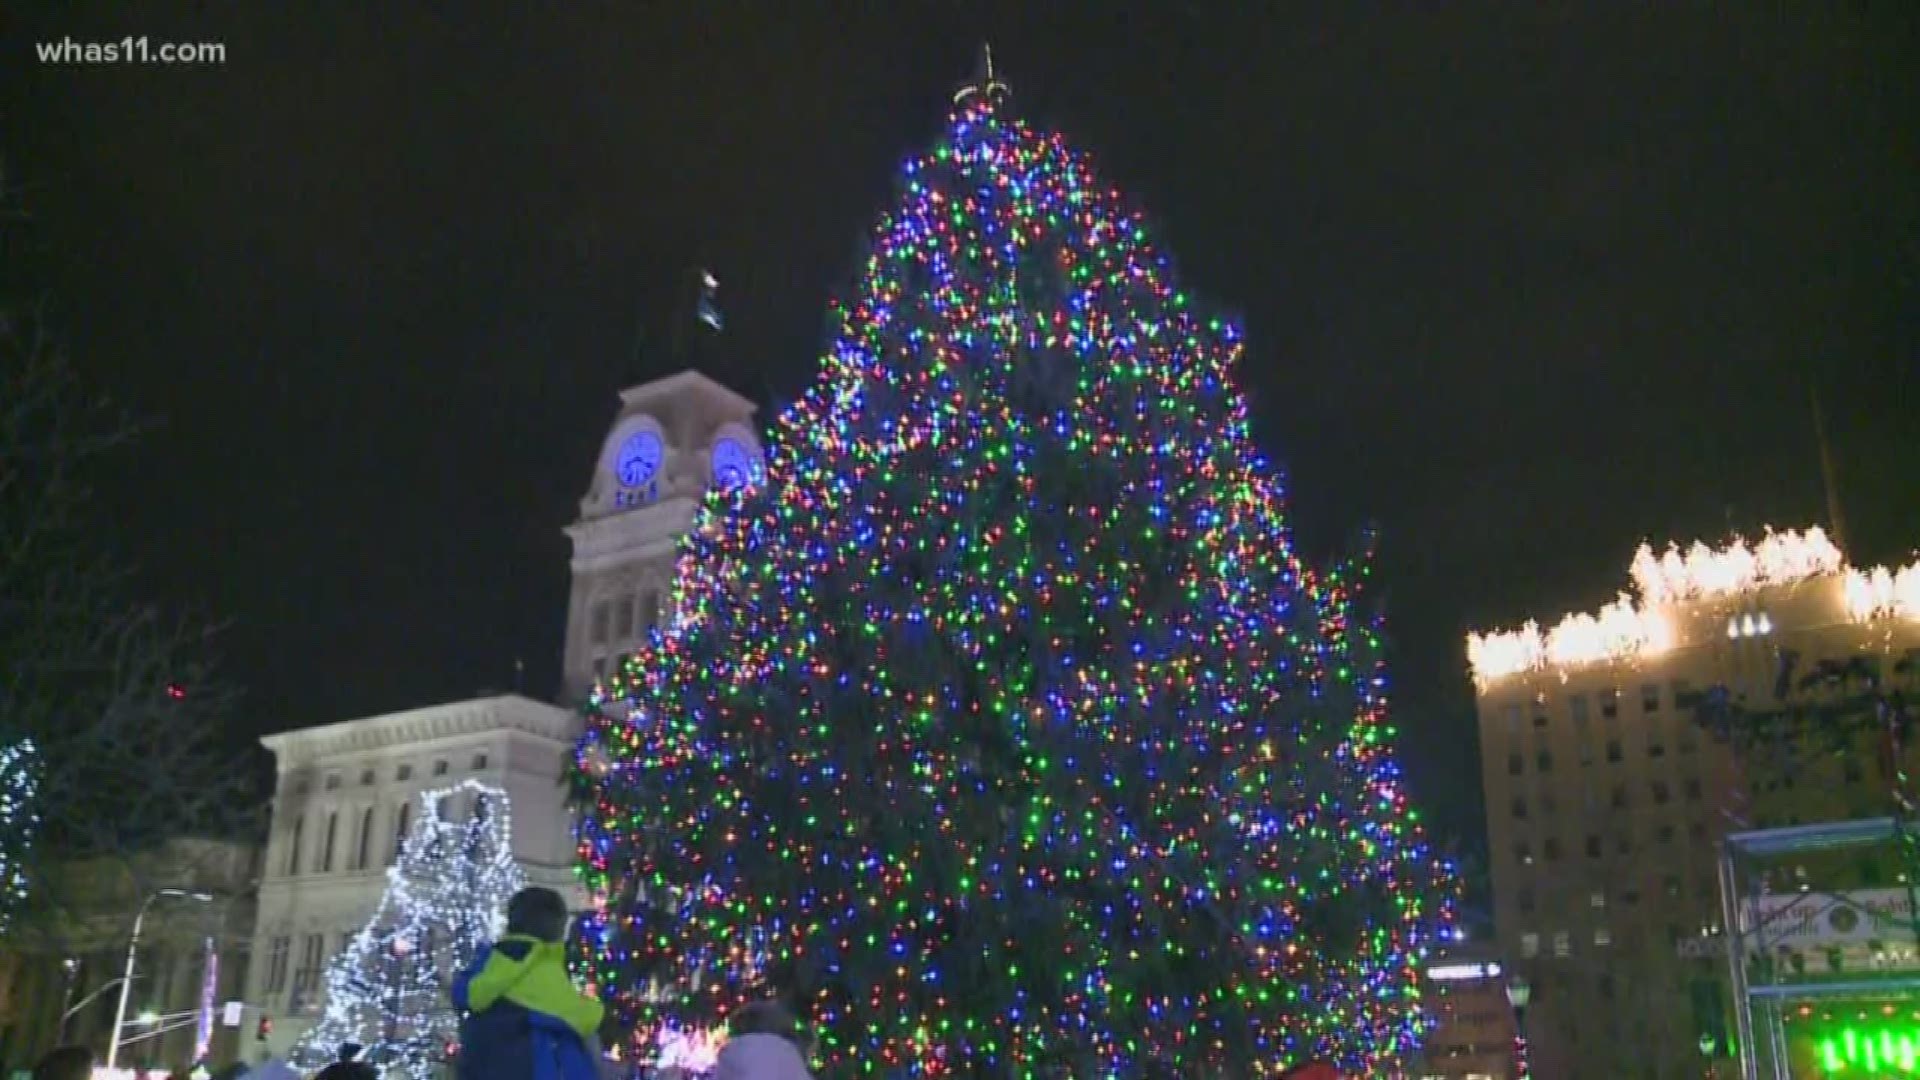 Light Up Louisville starts Nov. 29 at 3 p.m. with Santa arriving at 8 p.m.